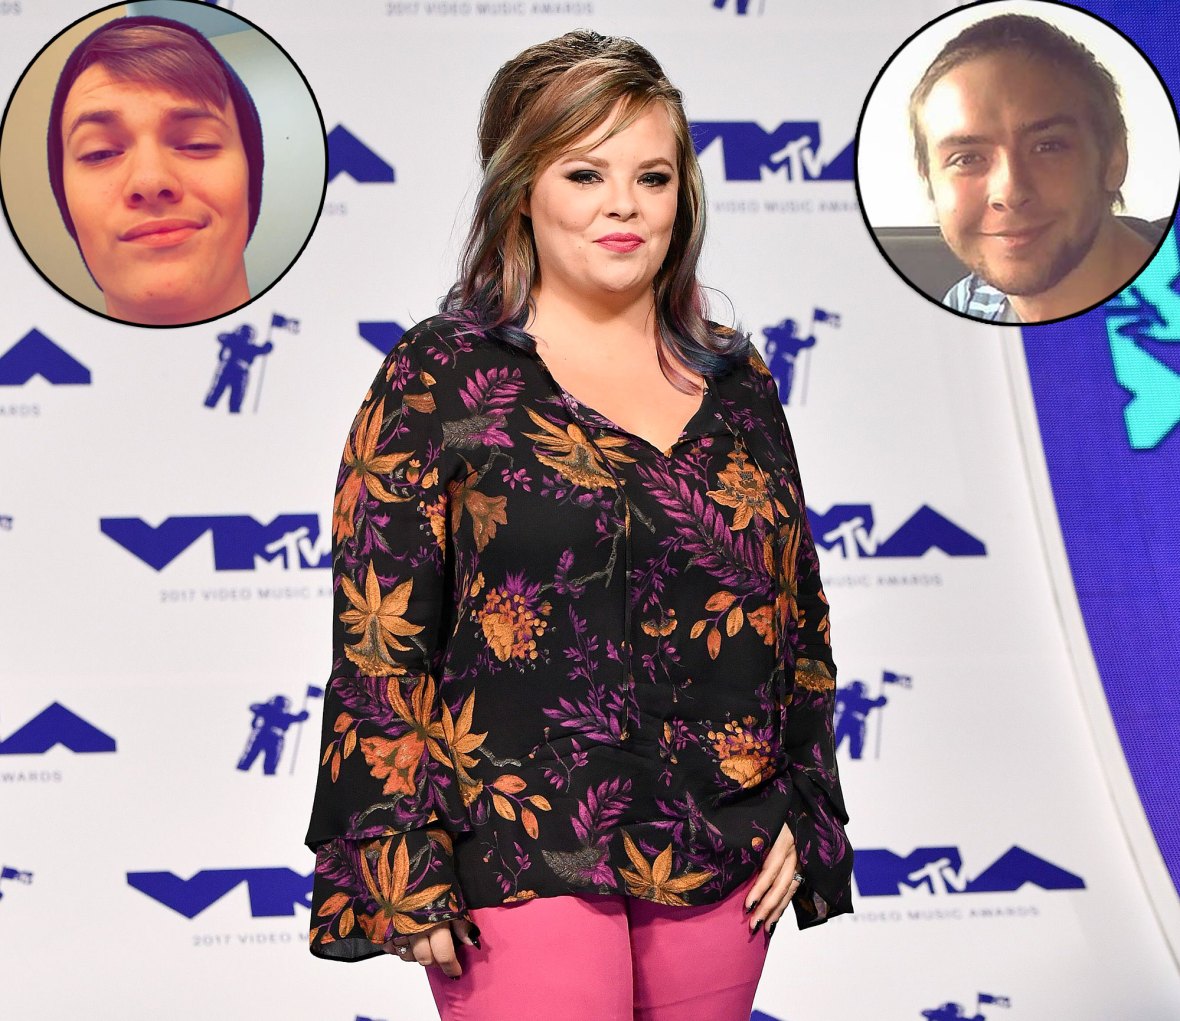 Catelynn Lowell Brothers Feud After Shade Over Pregnancy Nicholas and River